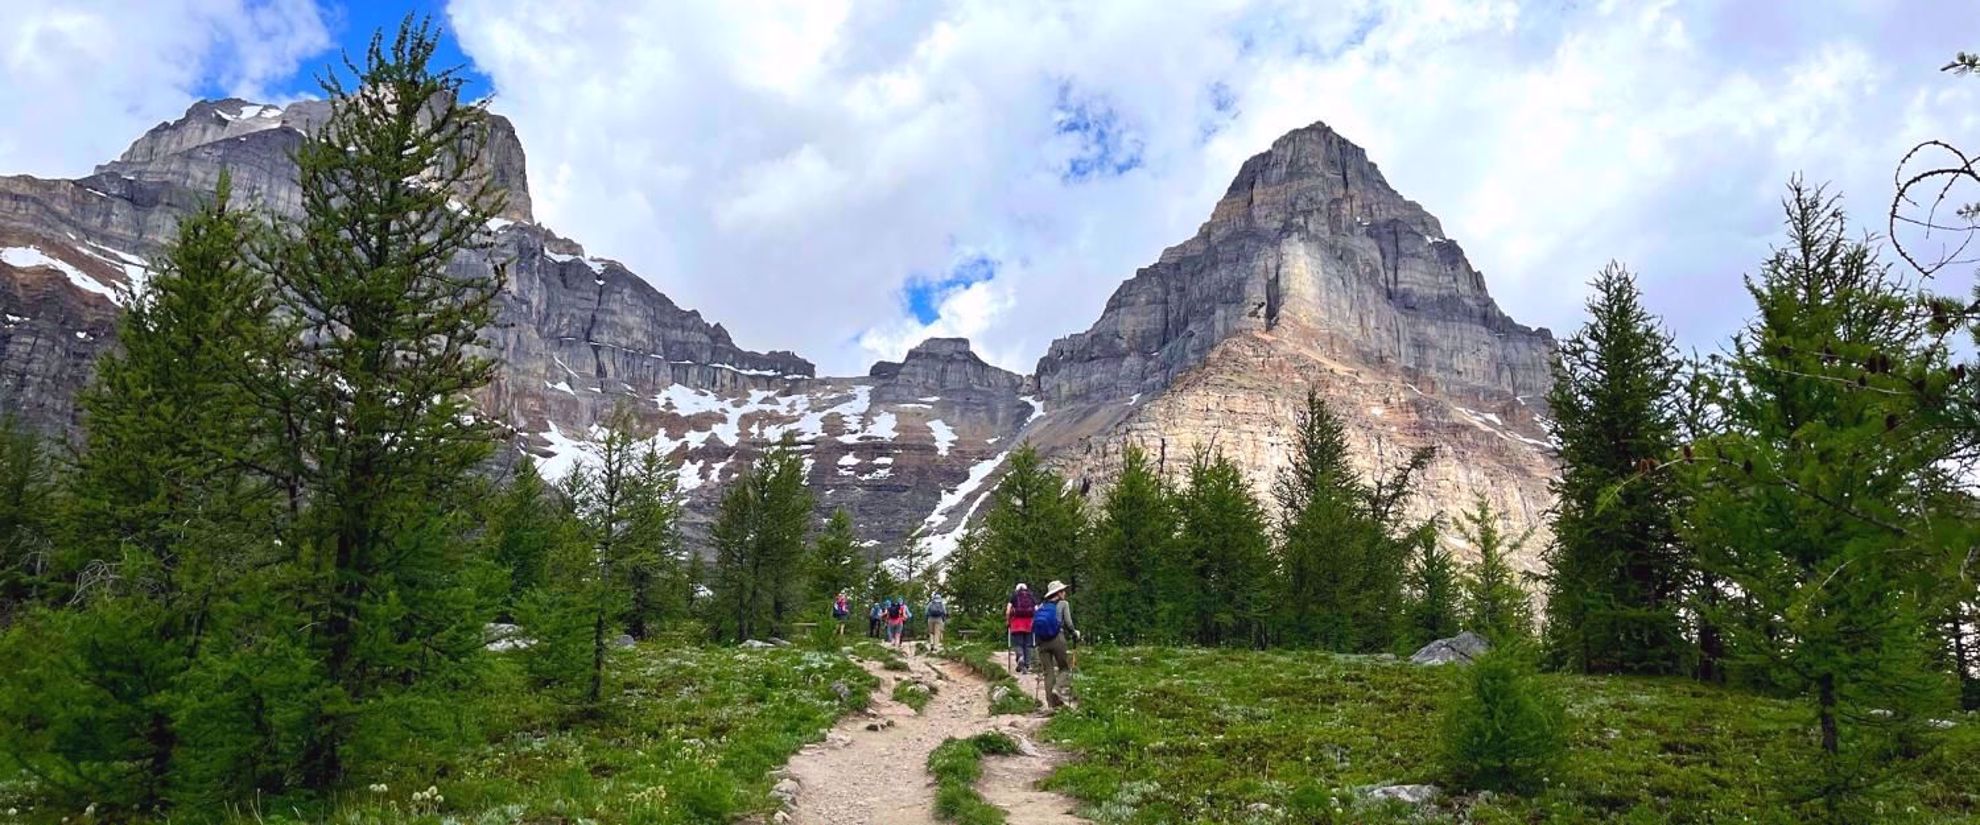 Trekking In The Canadian Rockies - 7 Amazing Multi-Day Backpacking  Adventures!